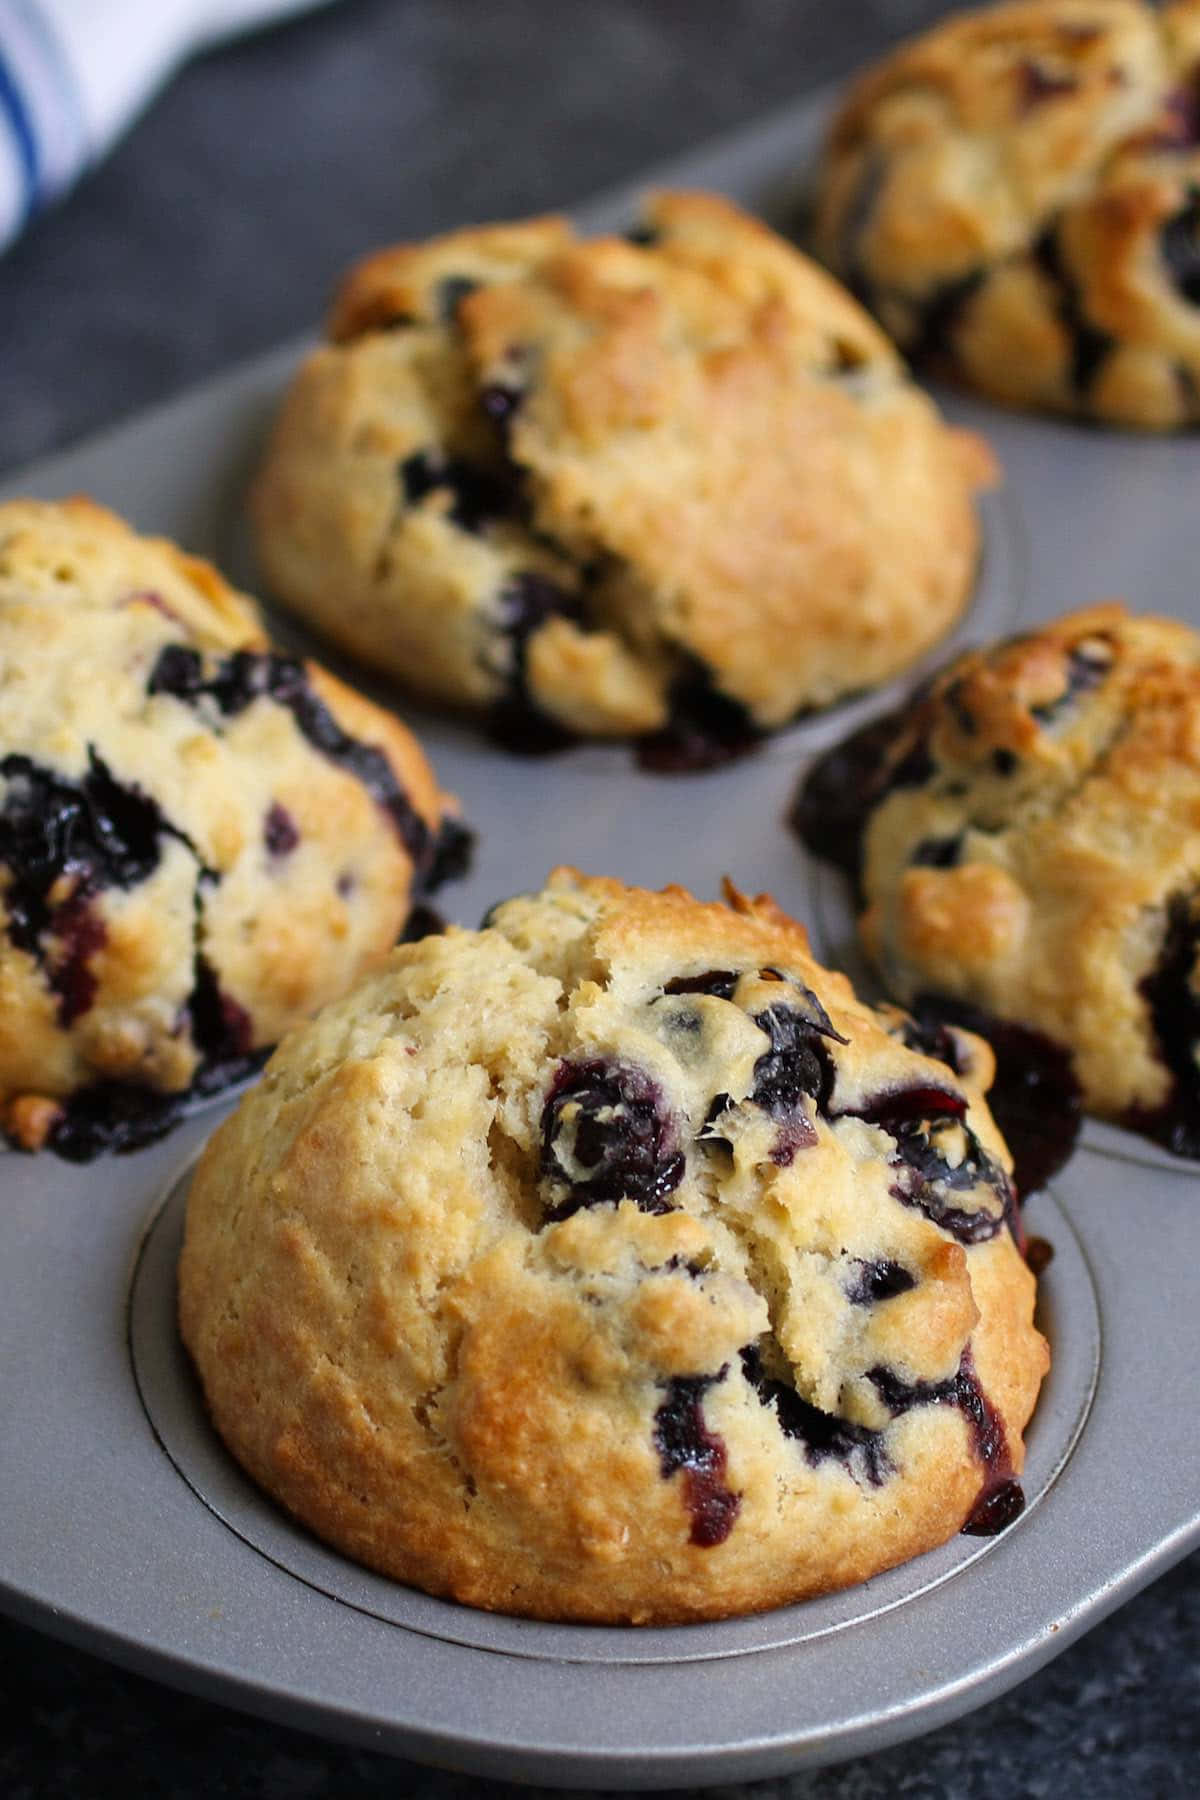 Sweet and juicy blueberry muffins. Wallpaper